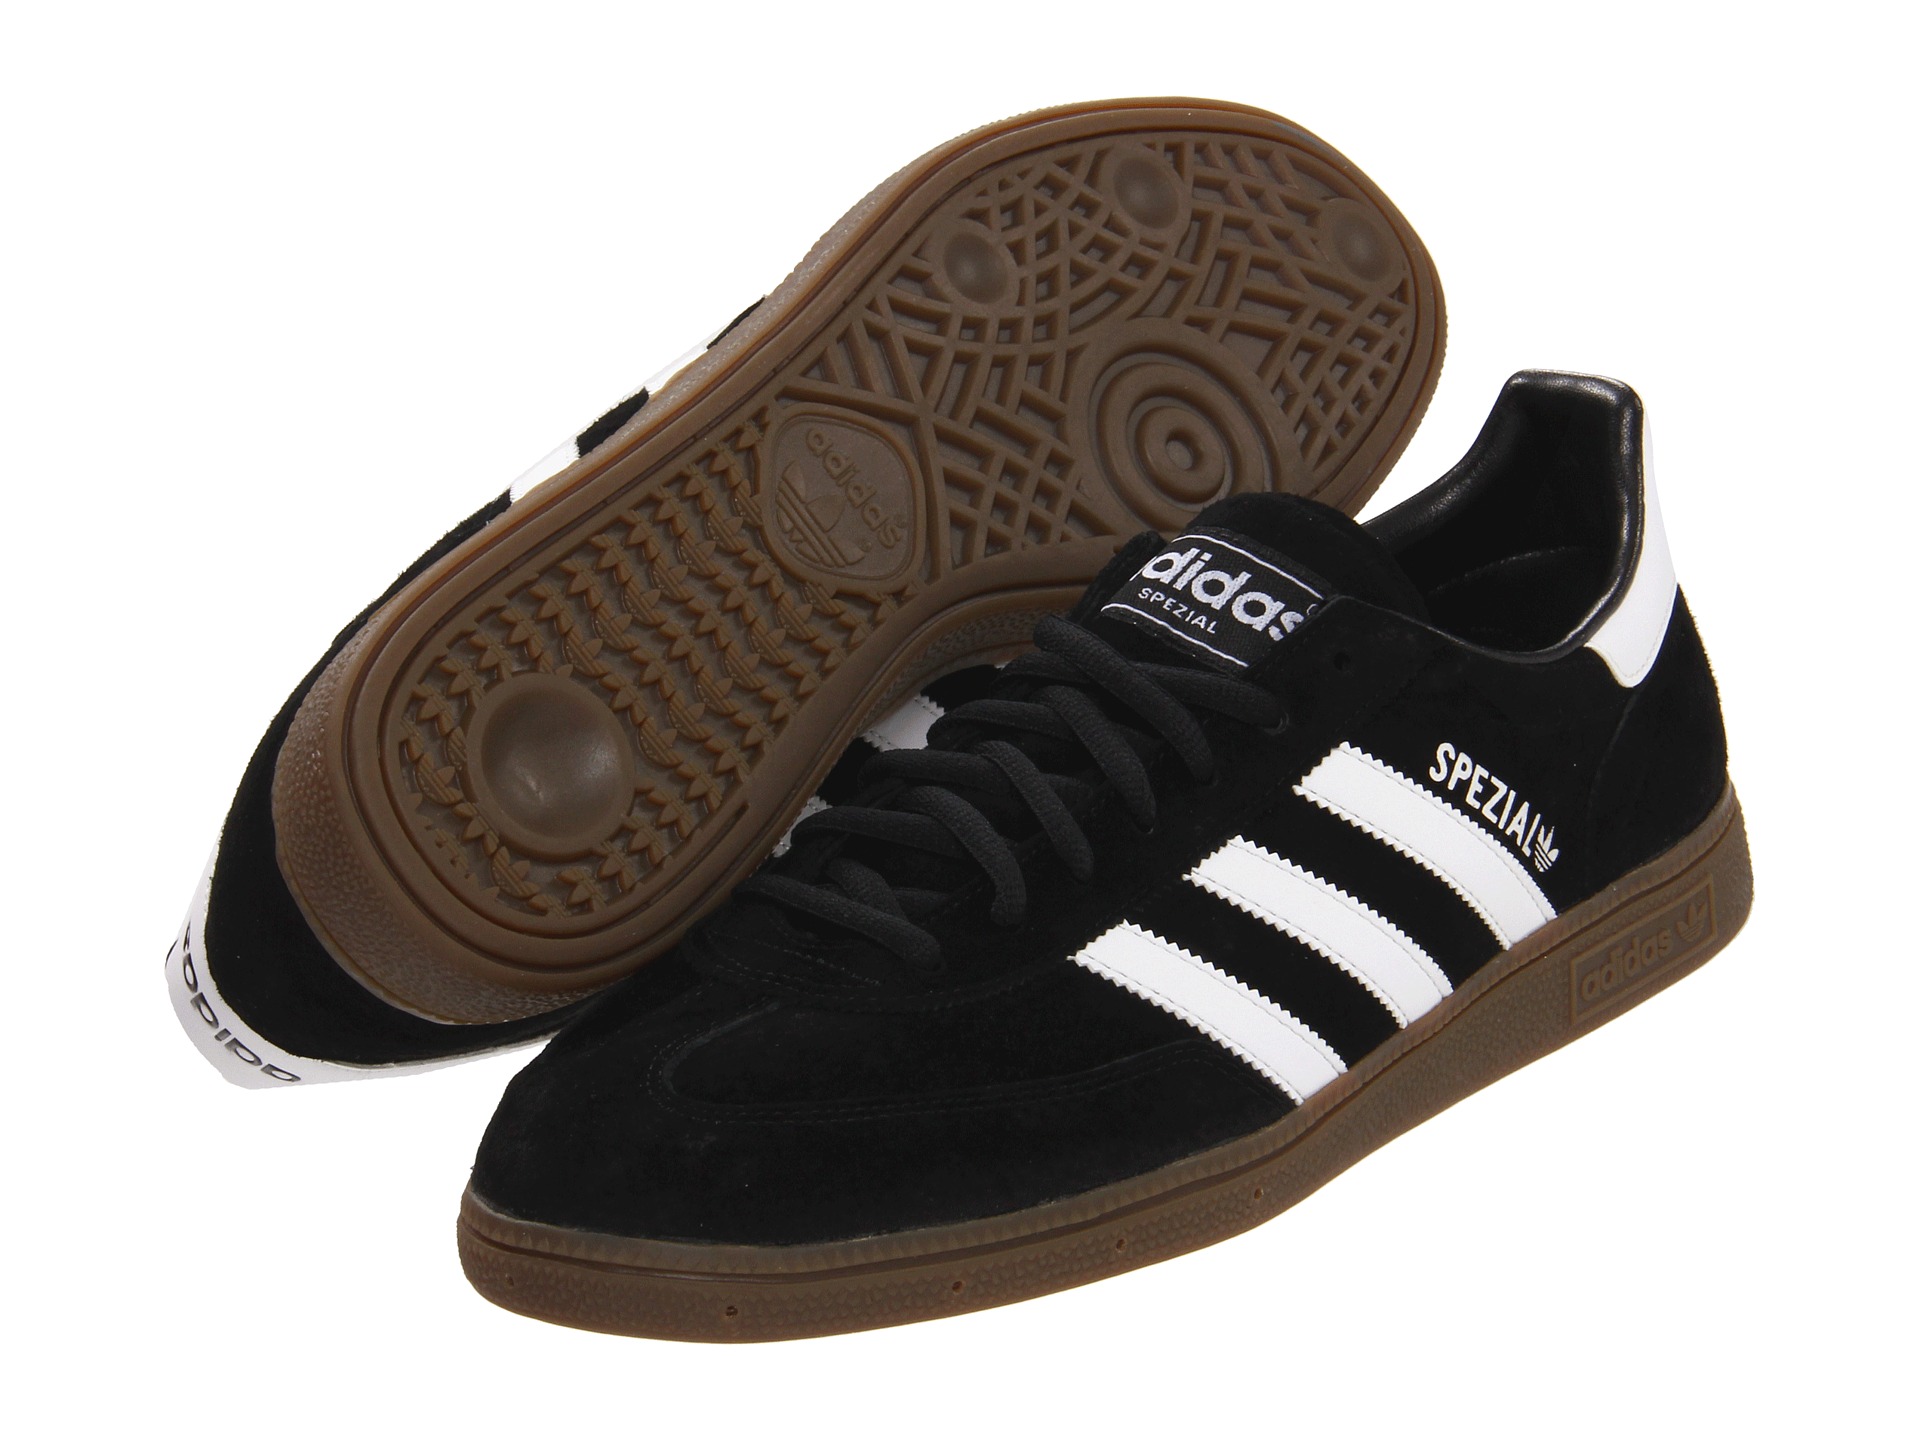 Adidas Spezial | Adidas, Shoe boots, Shoes trainers